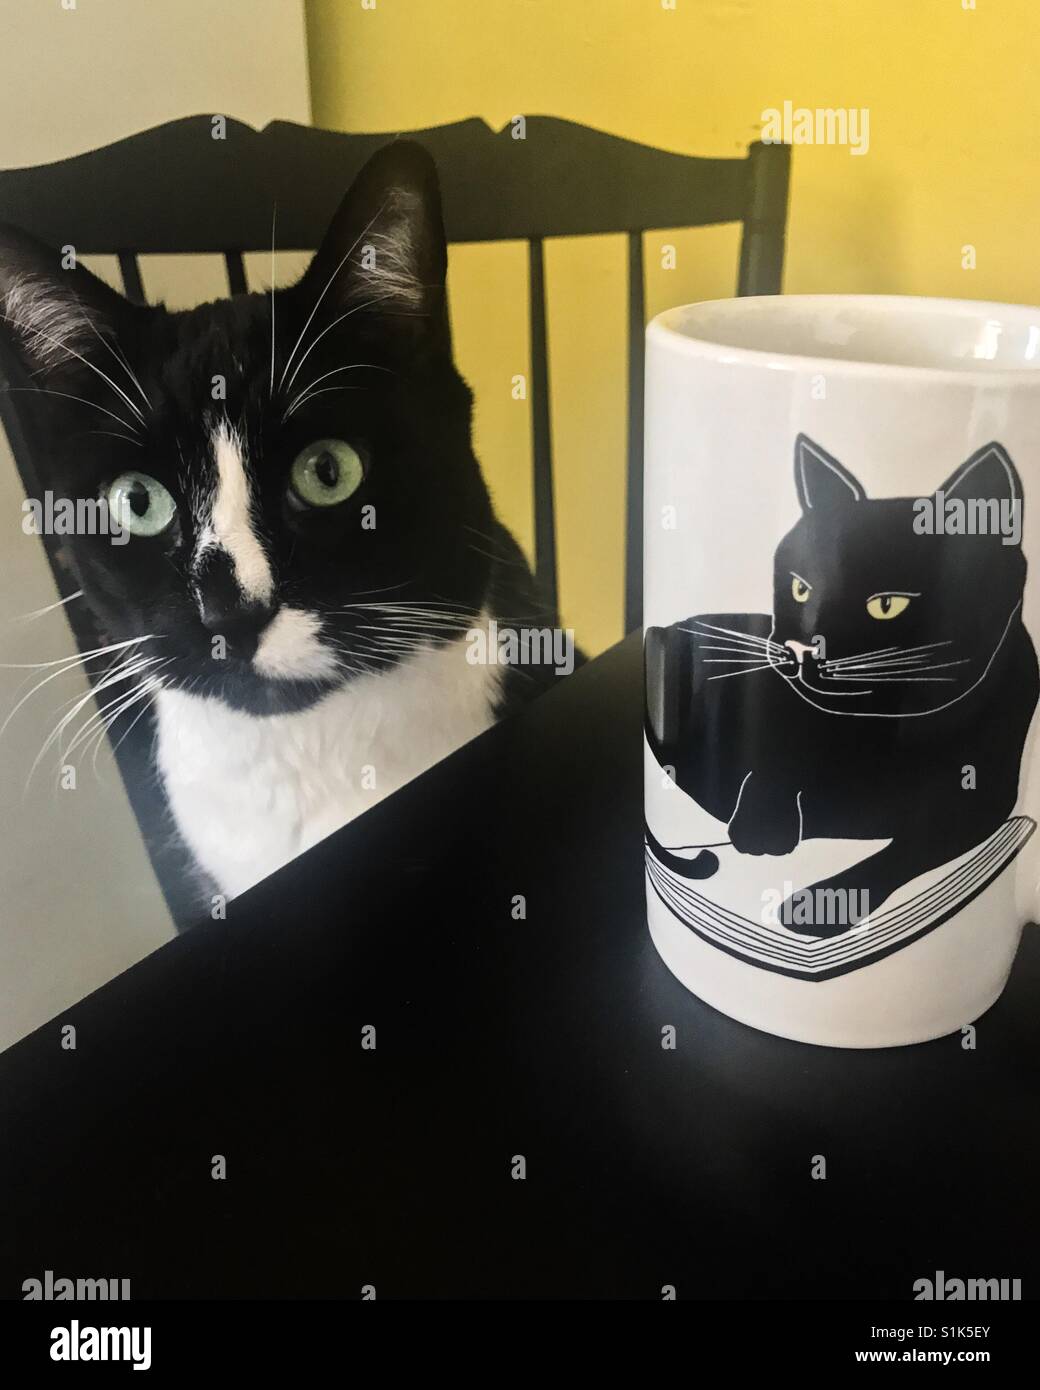 Cat and cup that look alike. Stock Photo